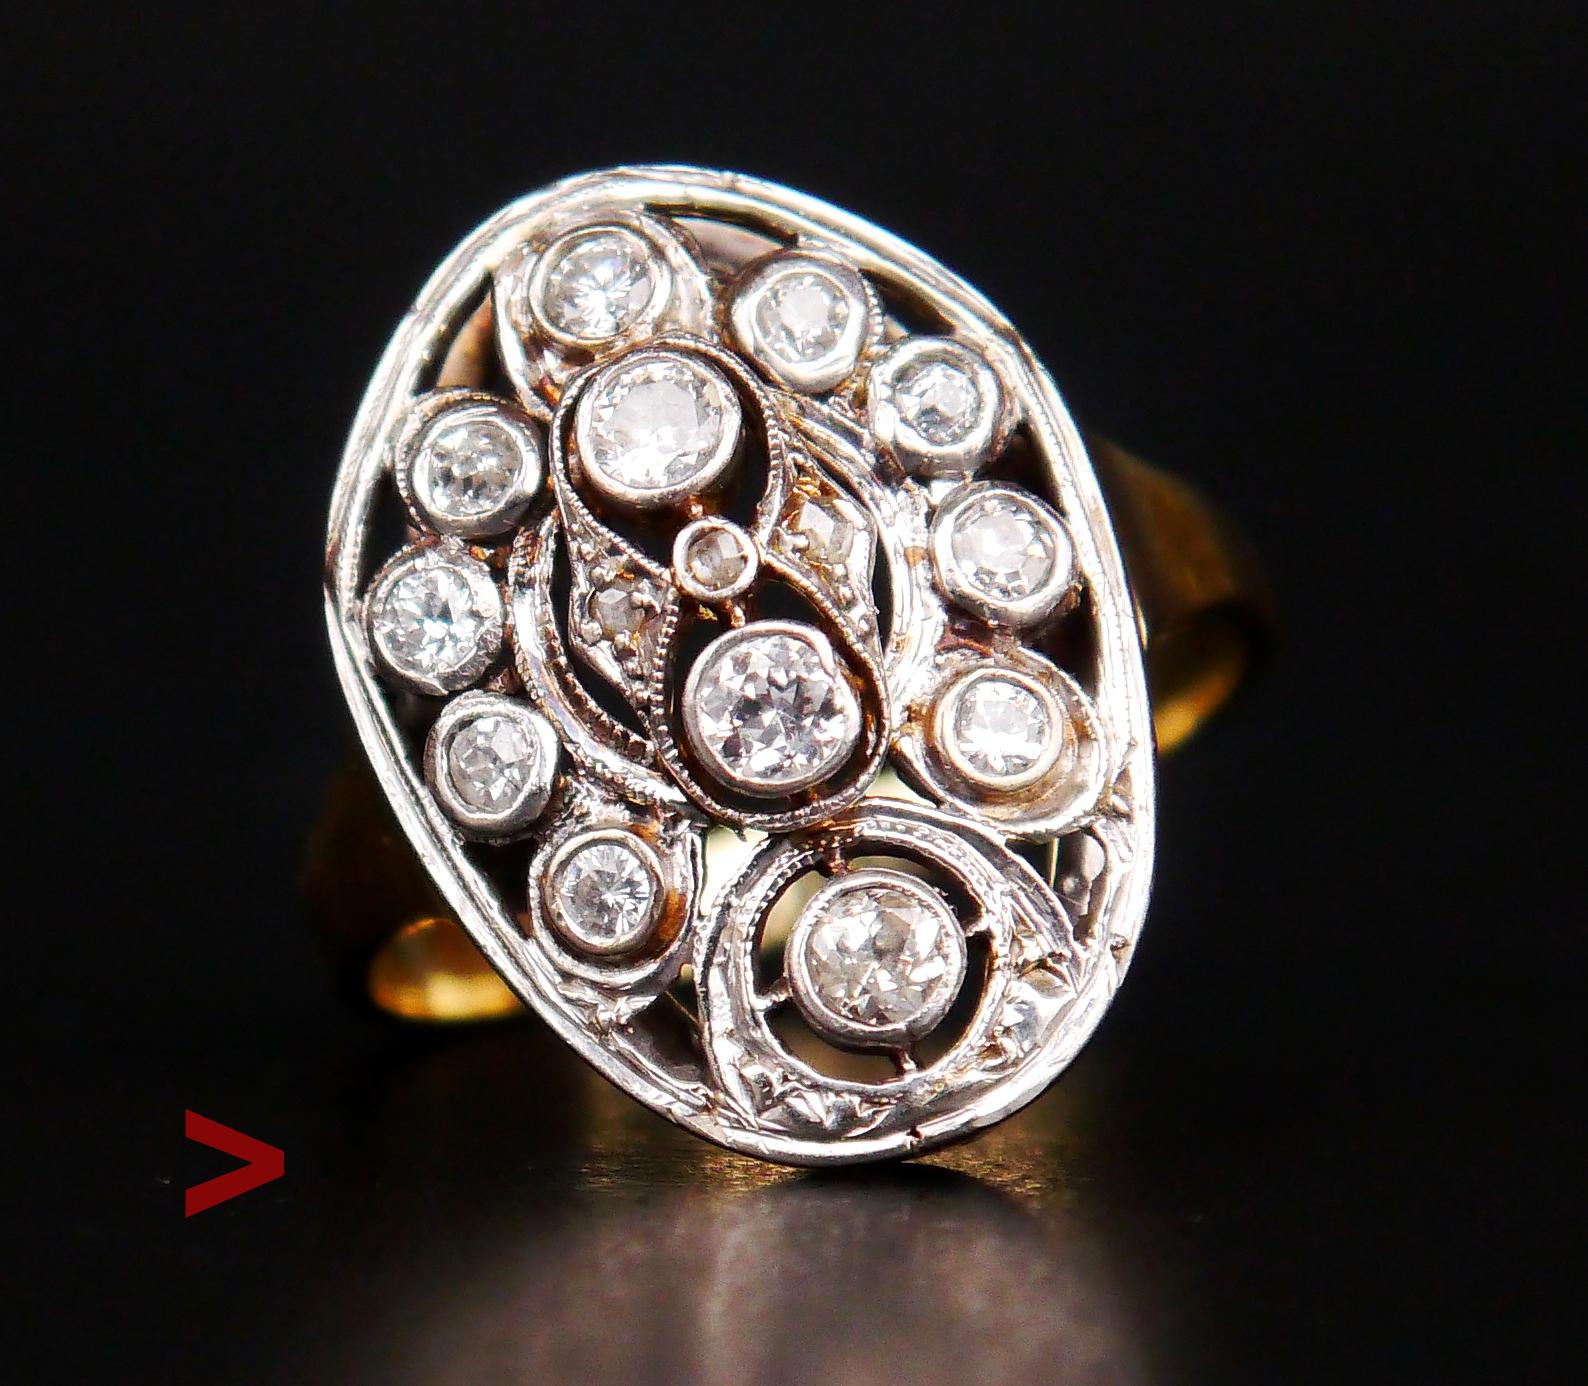 Danish ring made ca. 1920 - 1930s.

Solid/tested 14K Green Gold band + 14K White Gold face with ornamental open work set with 15 diamonds.

Under x 10 magnification some diamonds show Brilliant cut. Some others show old European diamond cut .. And